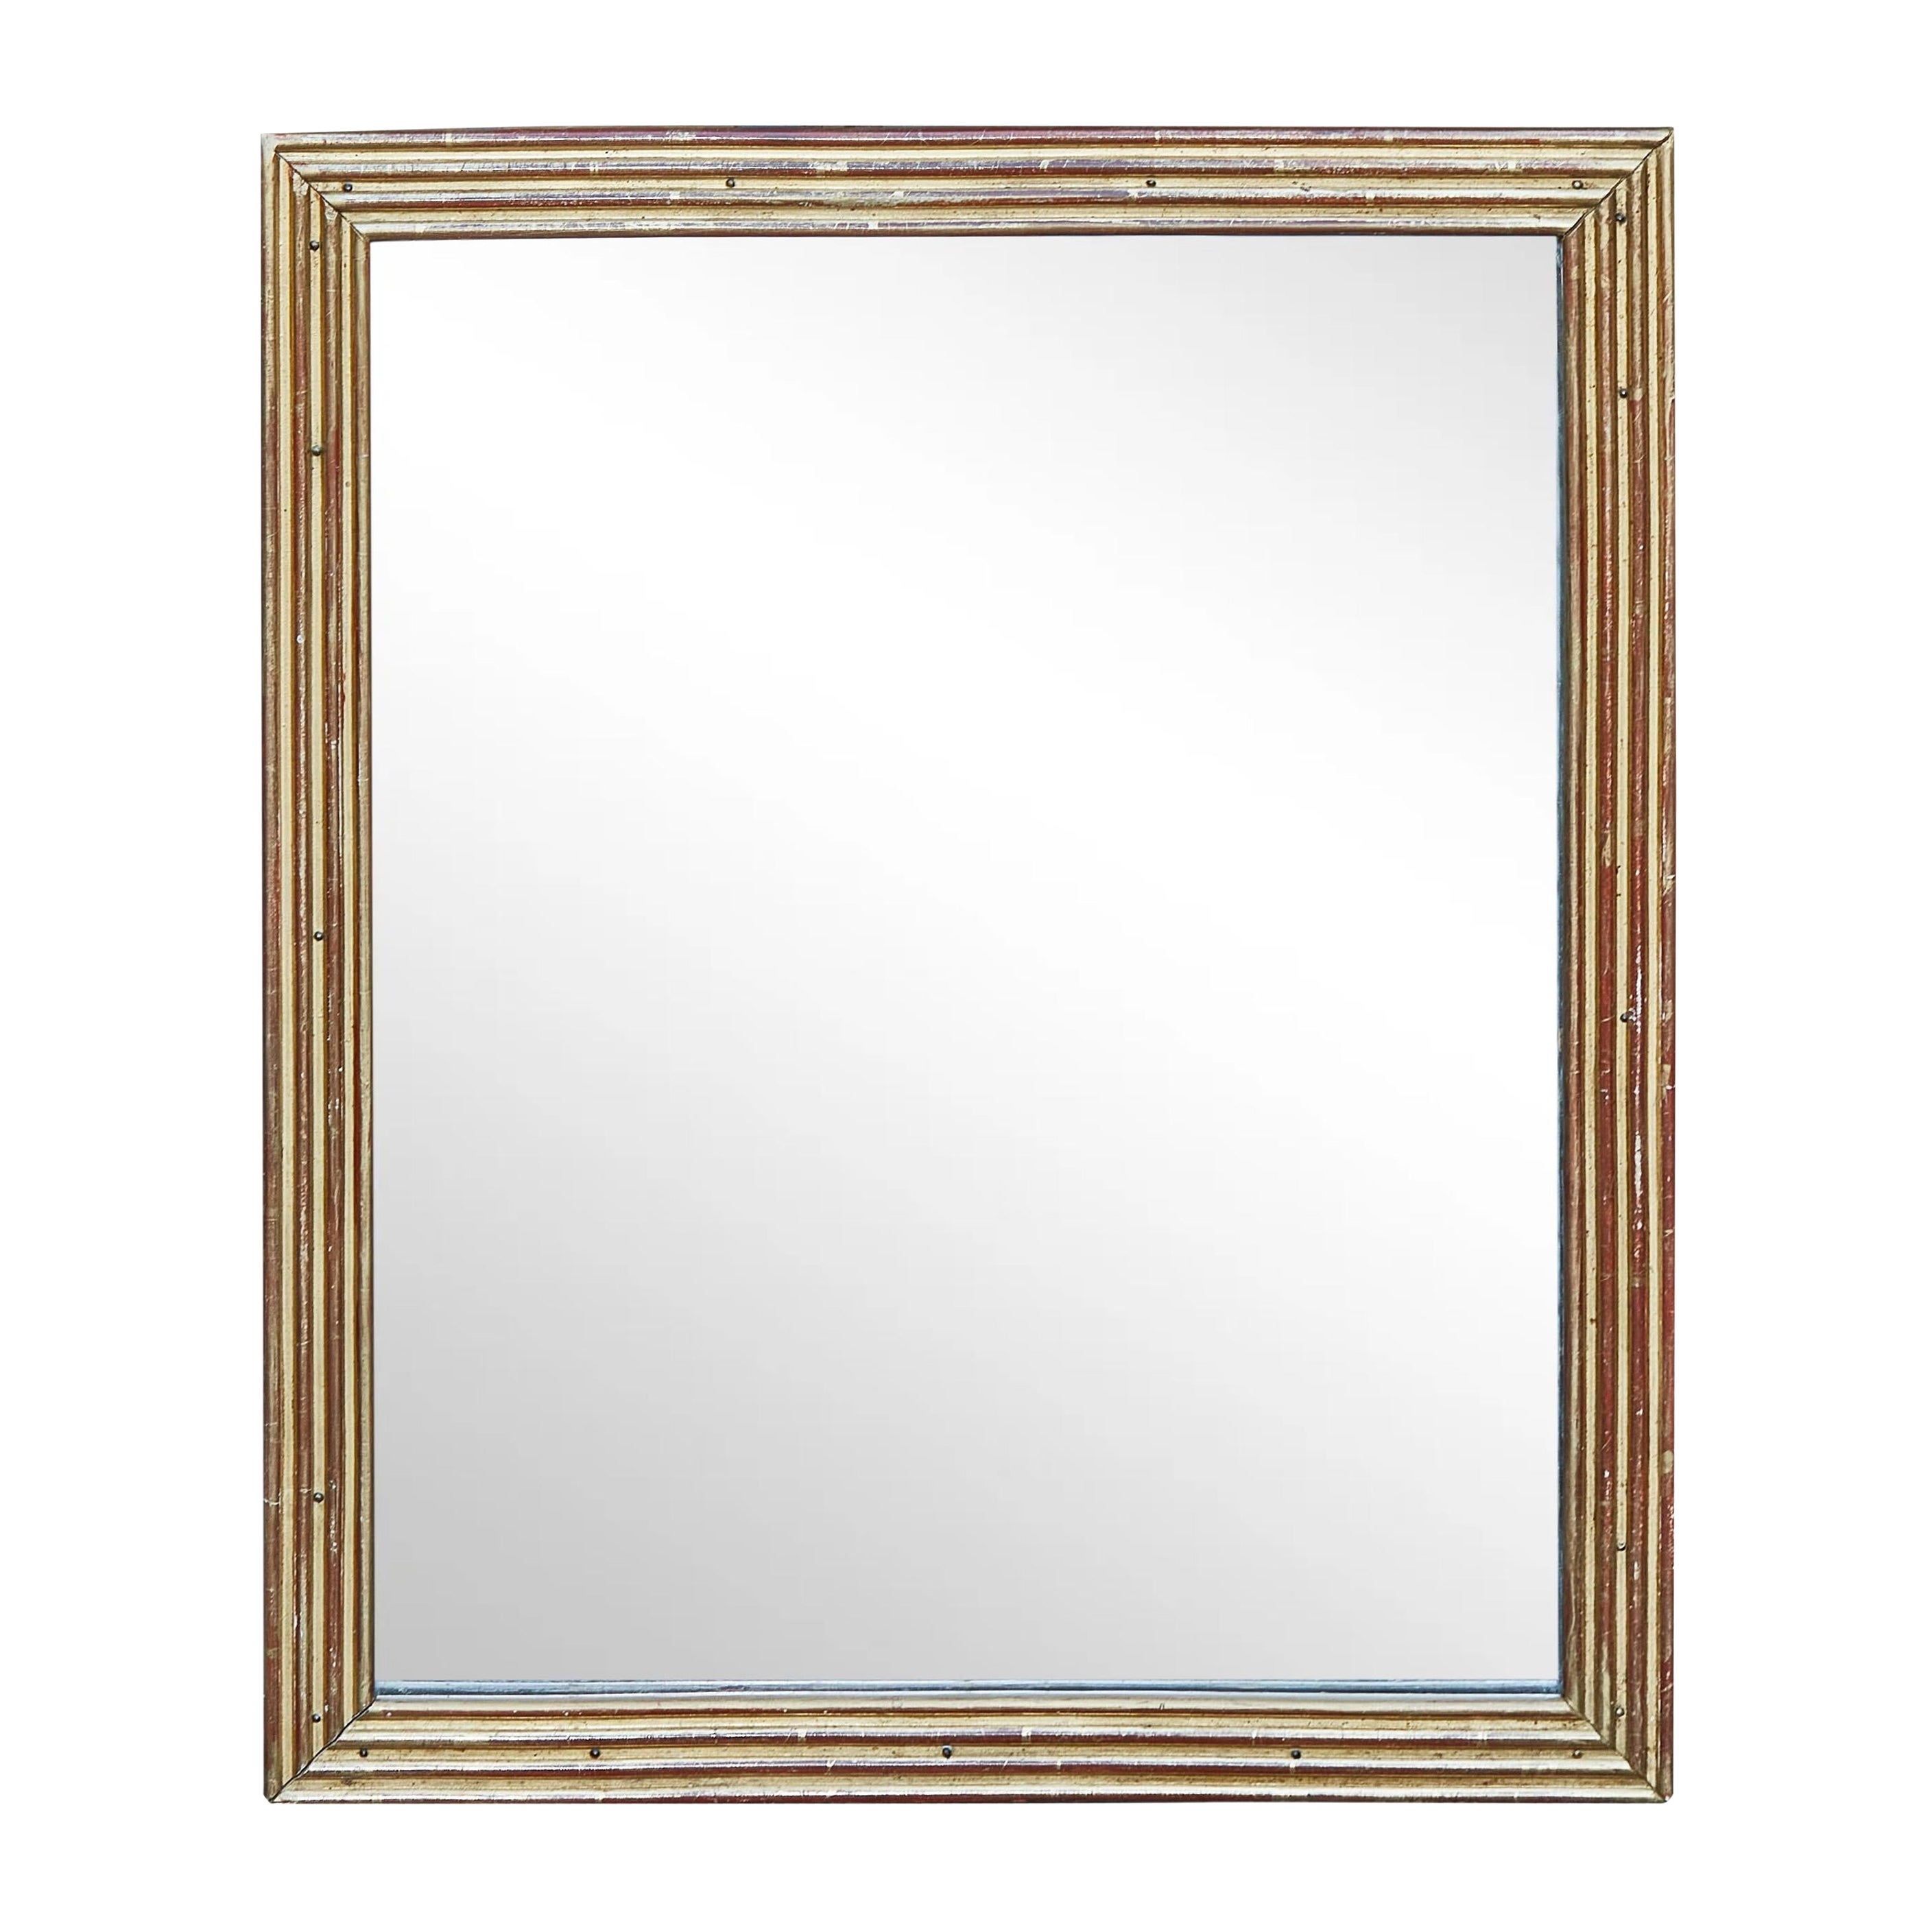 French 19th Century Giltwood Mirror with Linear Frame and Reeded Accents